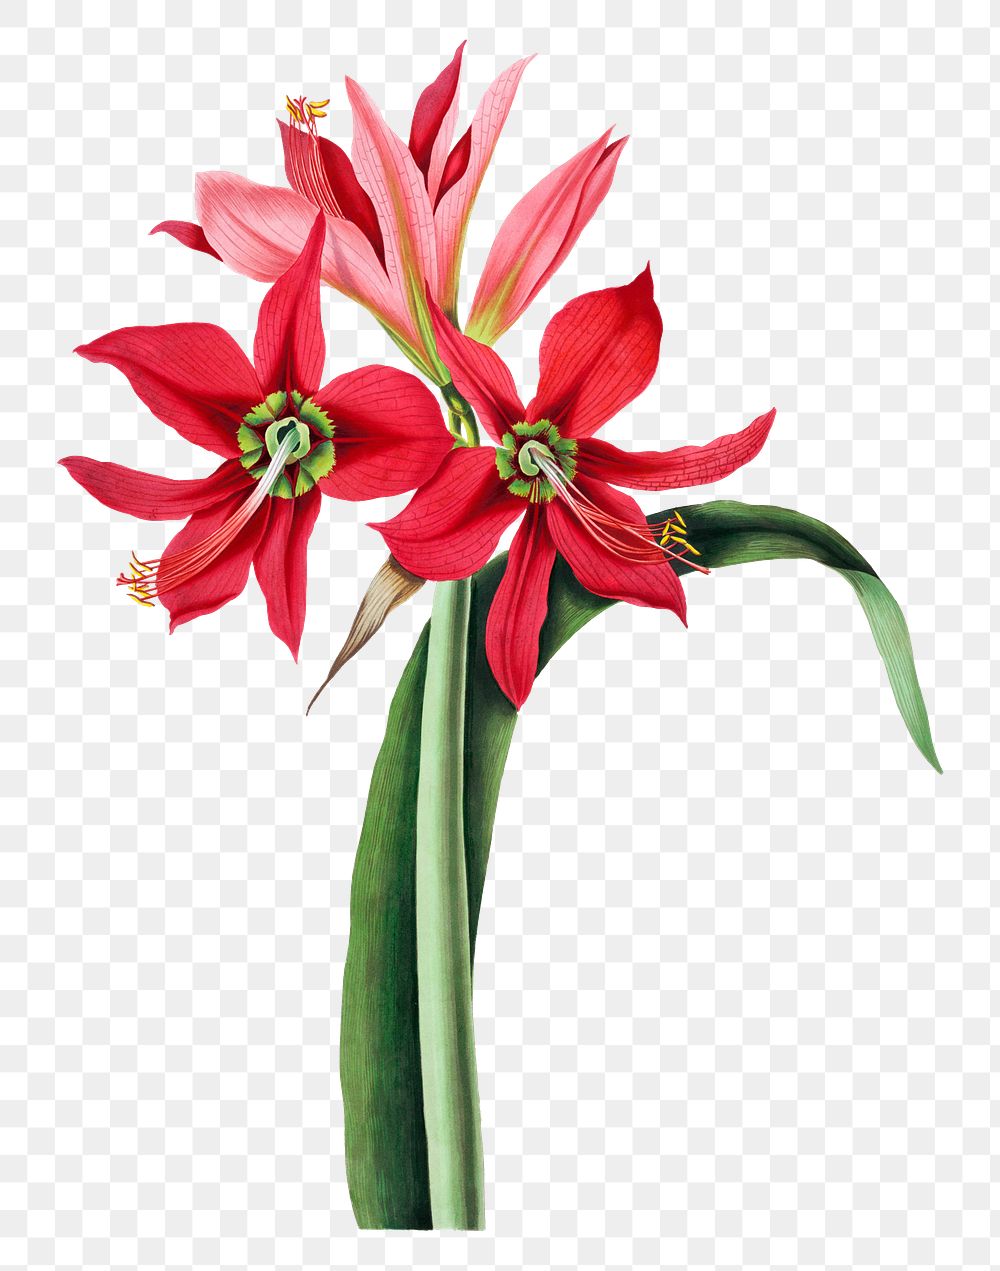 Vintage red lily flowers png illustration, remix from artworks by De Gouy